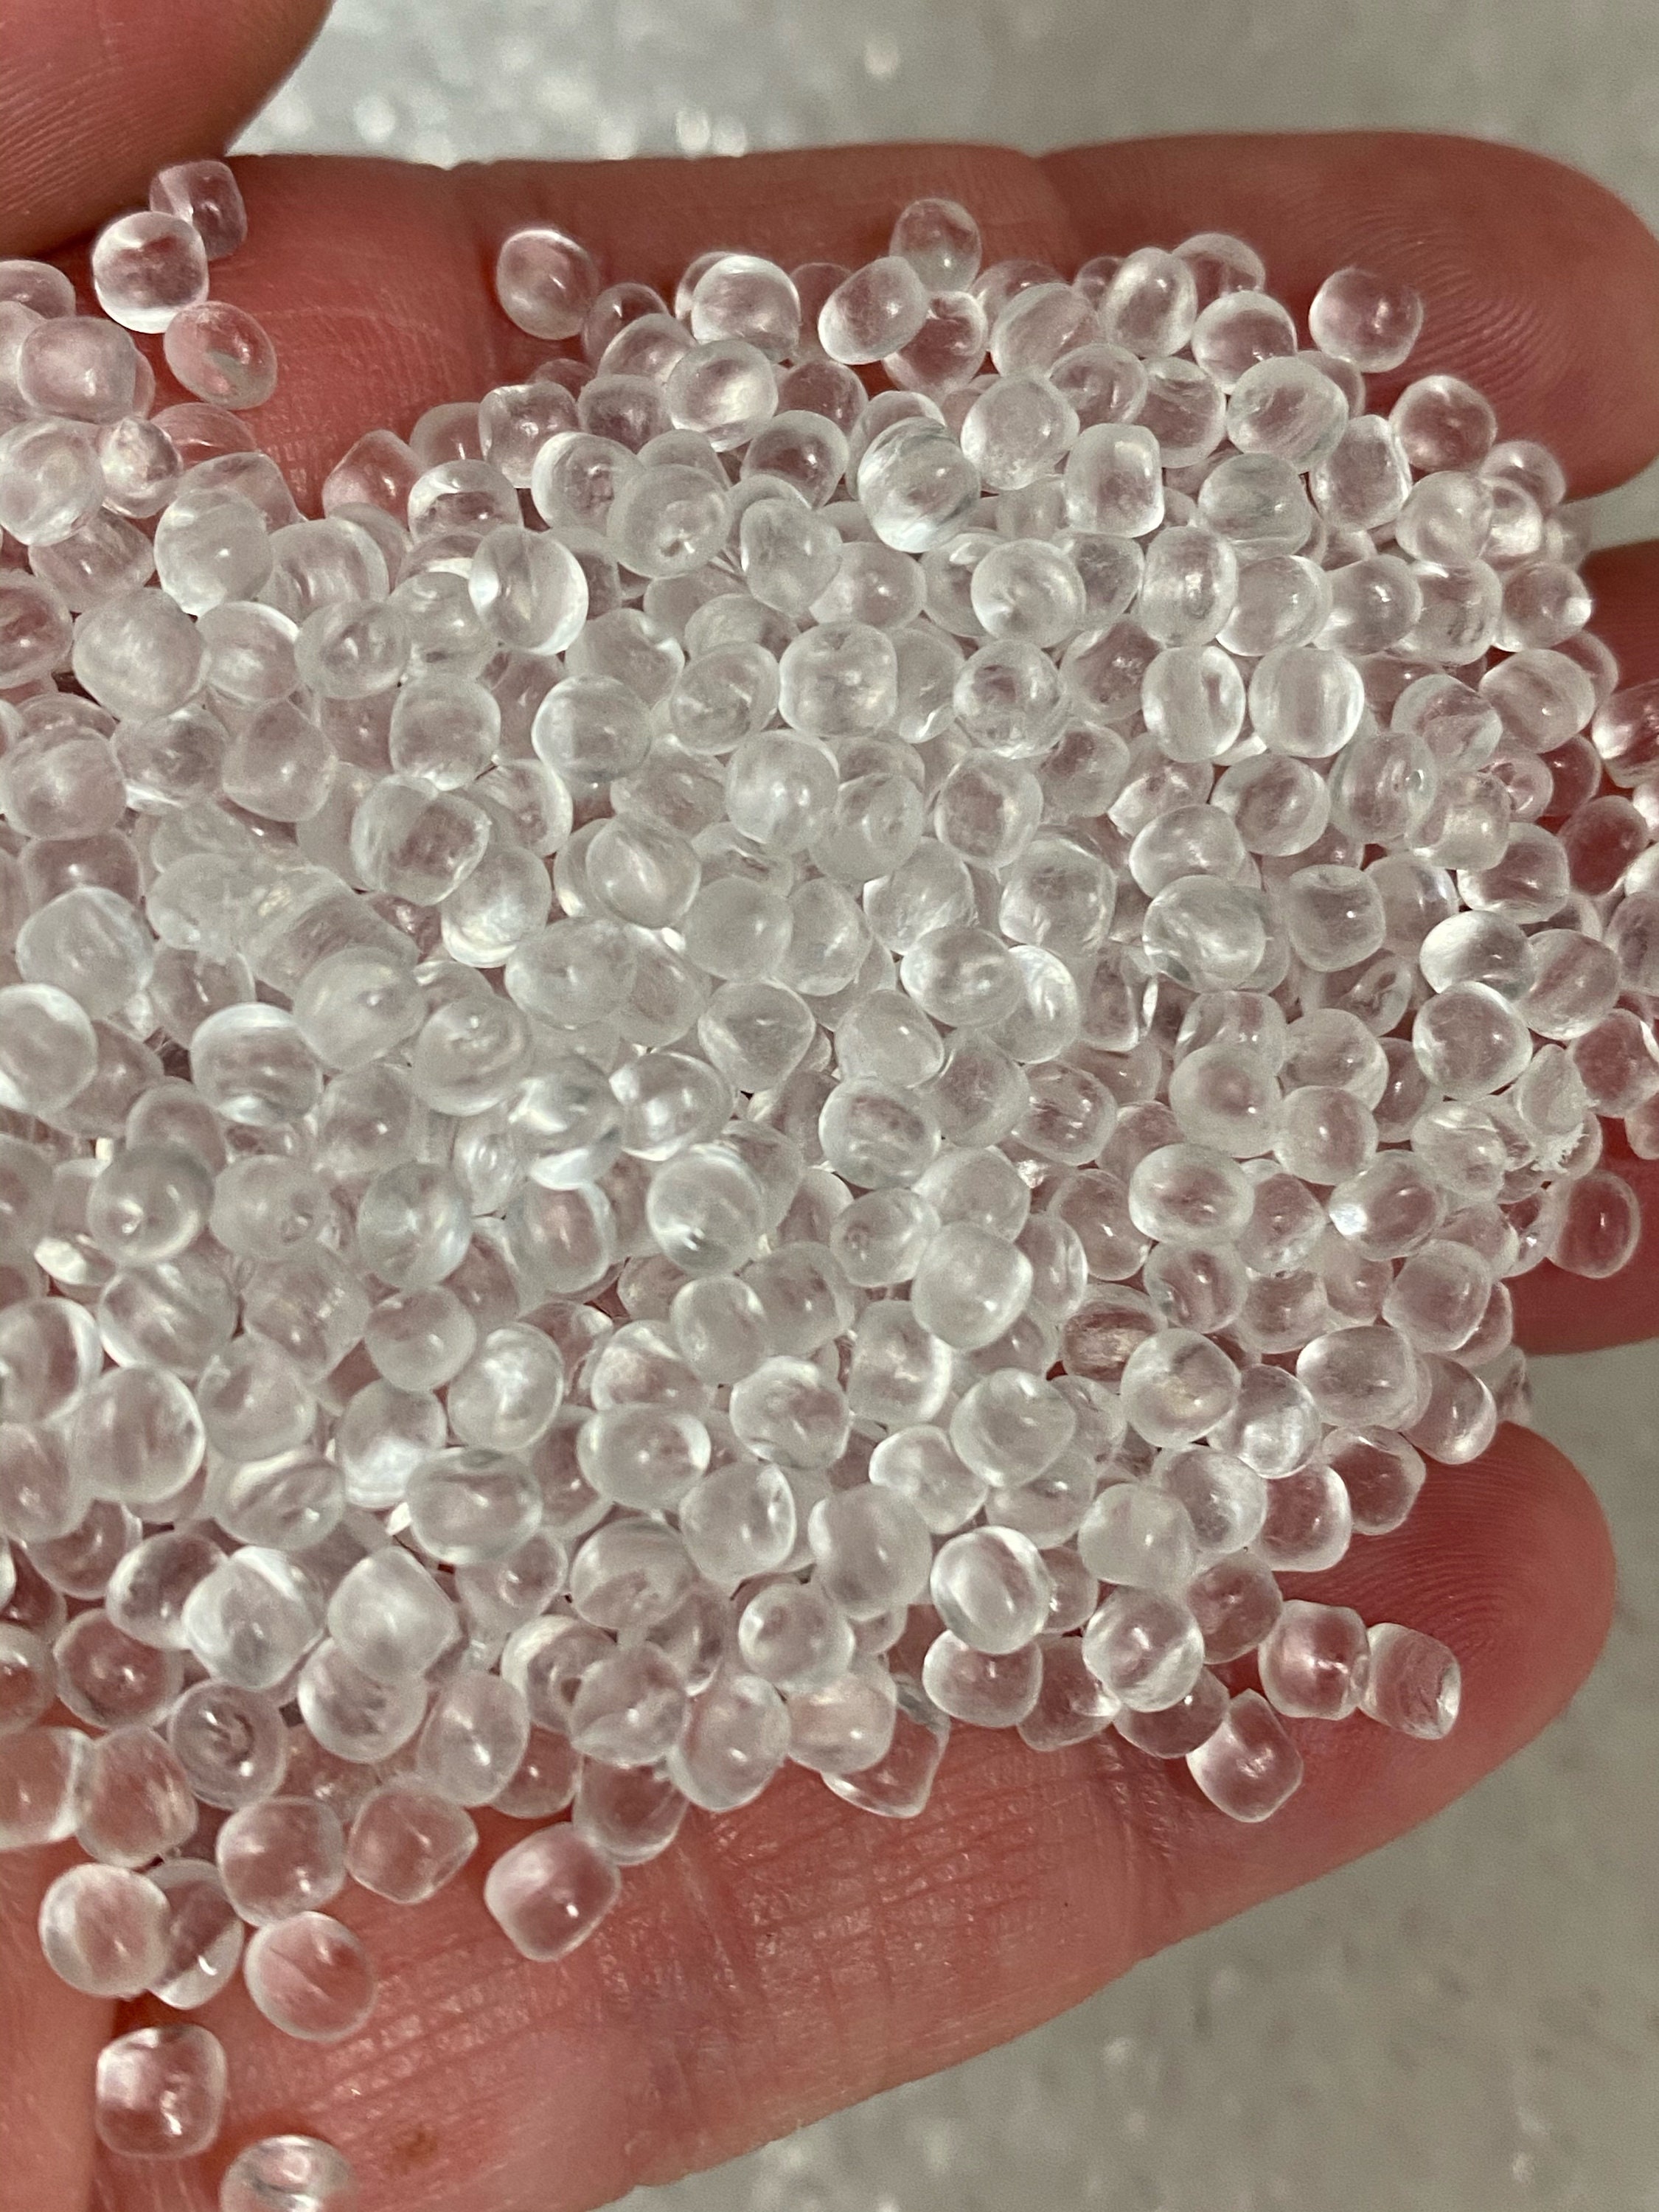 5 lb Unscented Premium Round Prime Aroma Beads Free Shipping